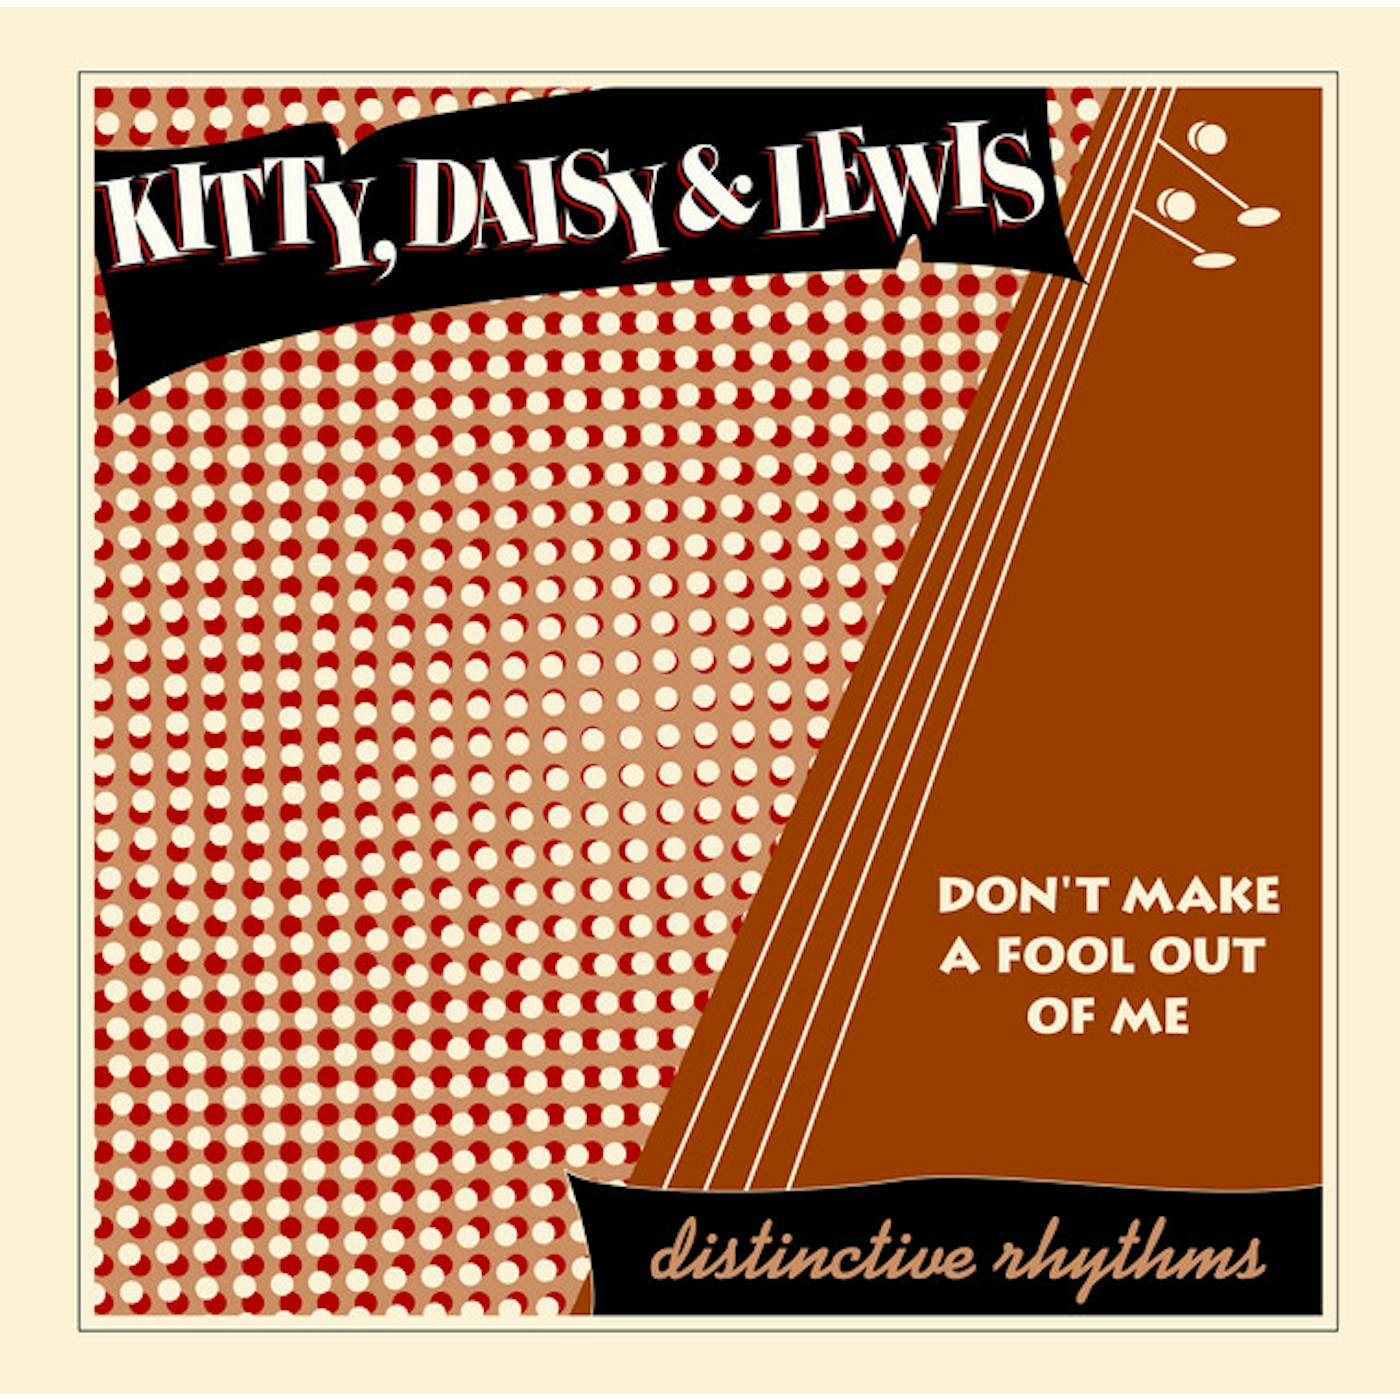 Kitty, Daisy & Lewis Don't Make a Fool Out of Me Vinyl Record